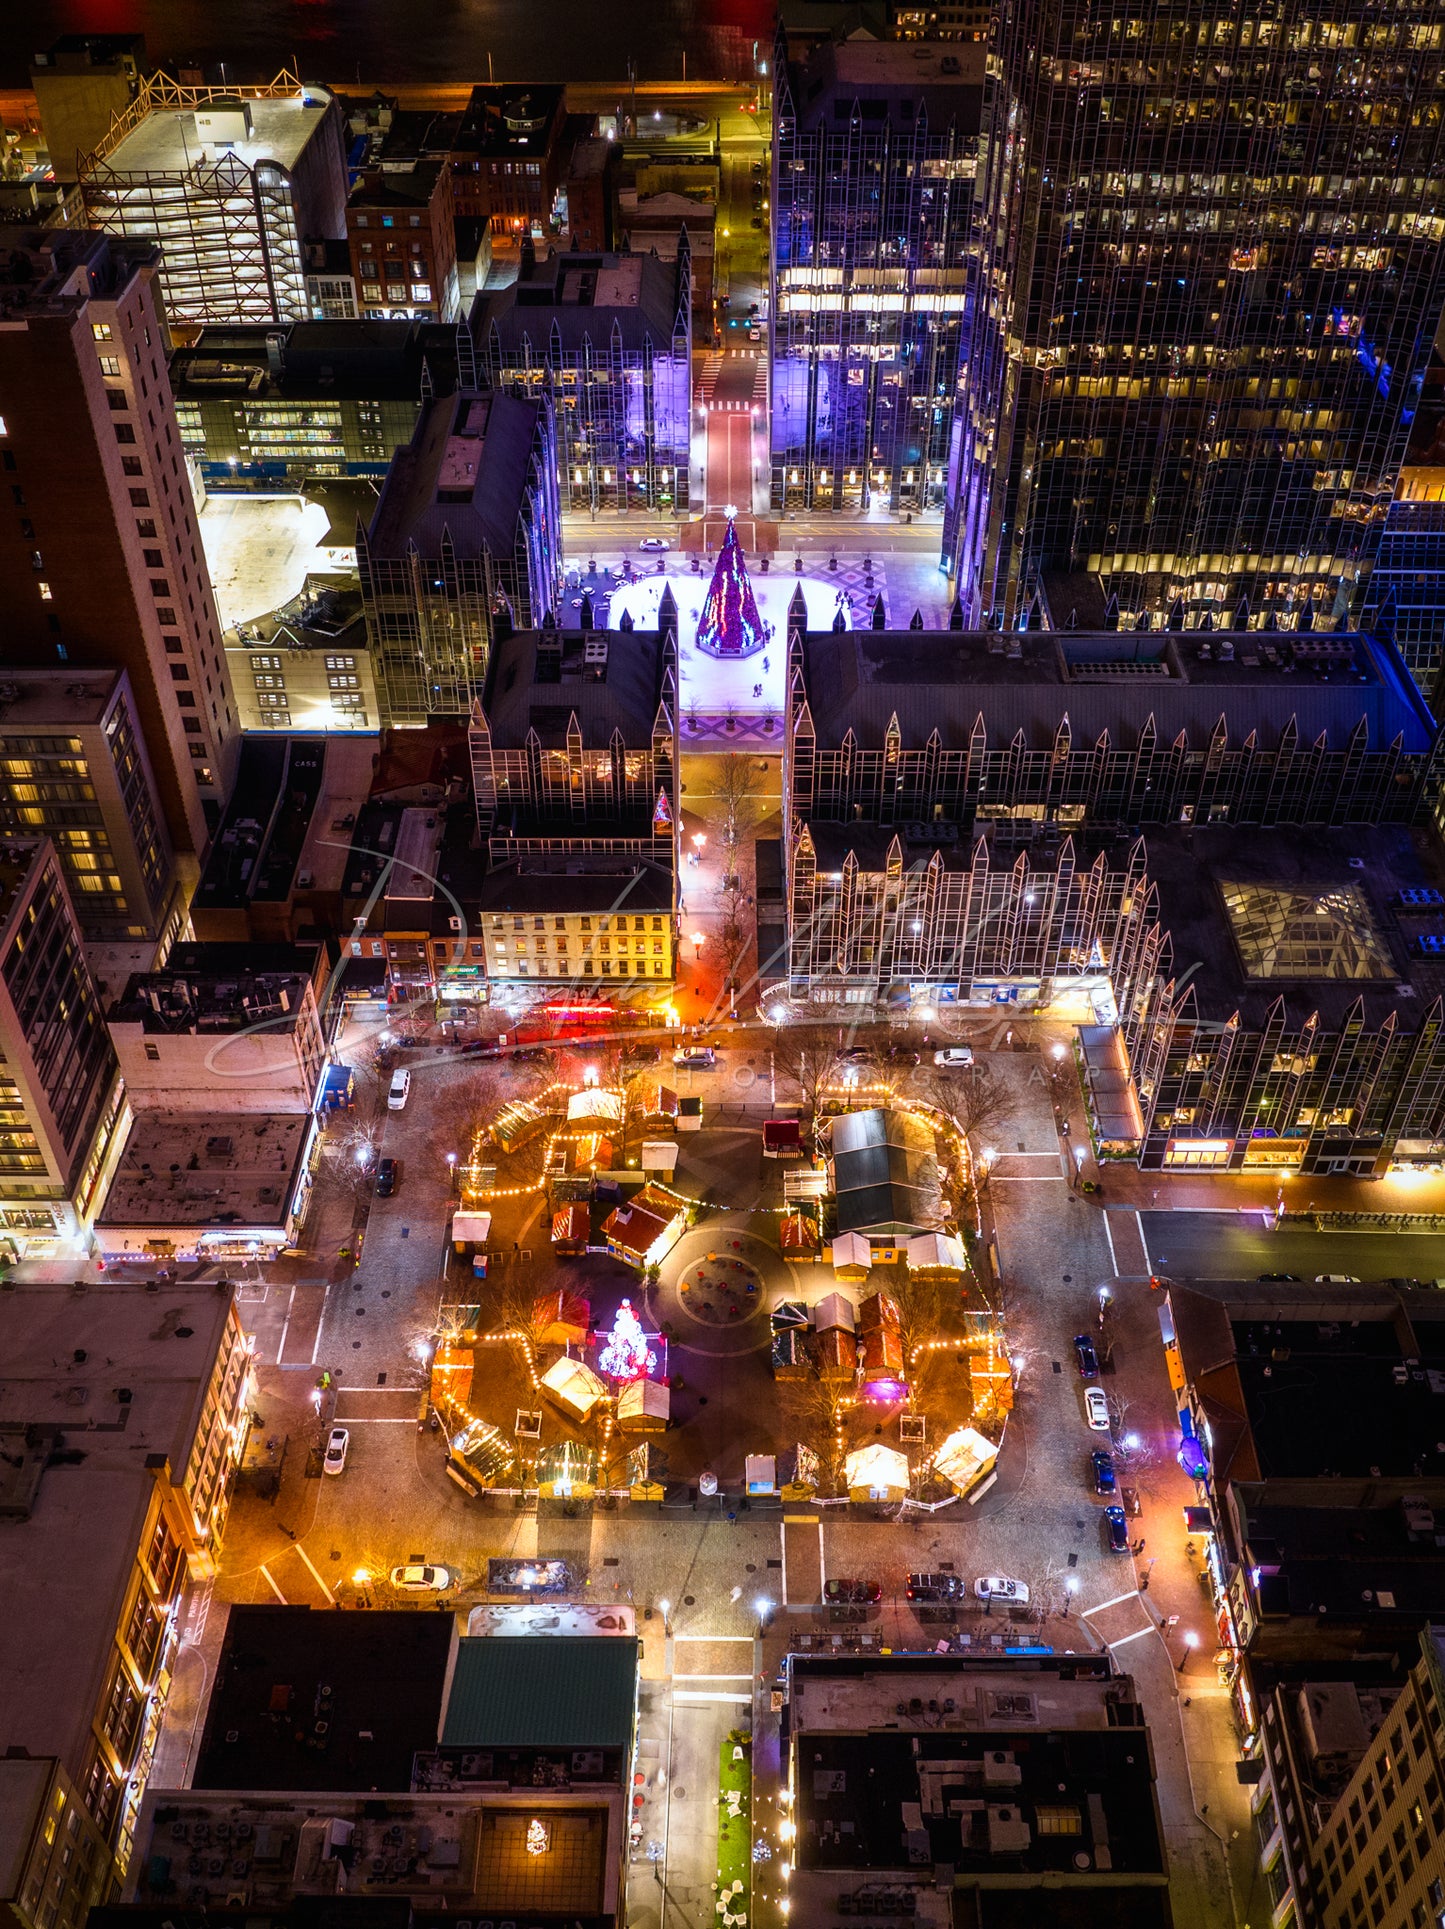 Aerial View of Market Square and PPG Skating Rink